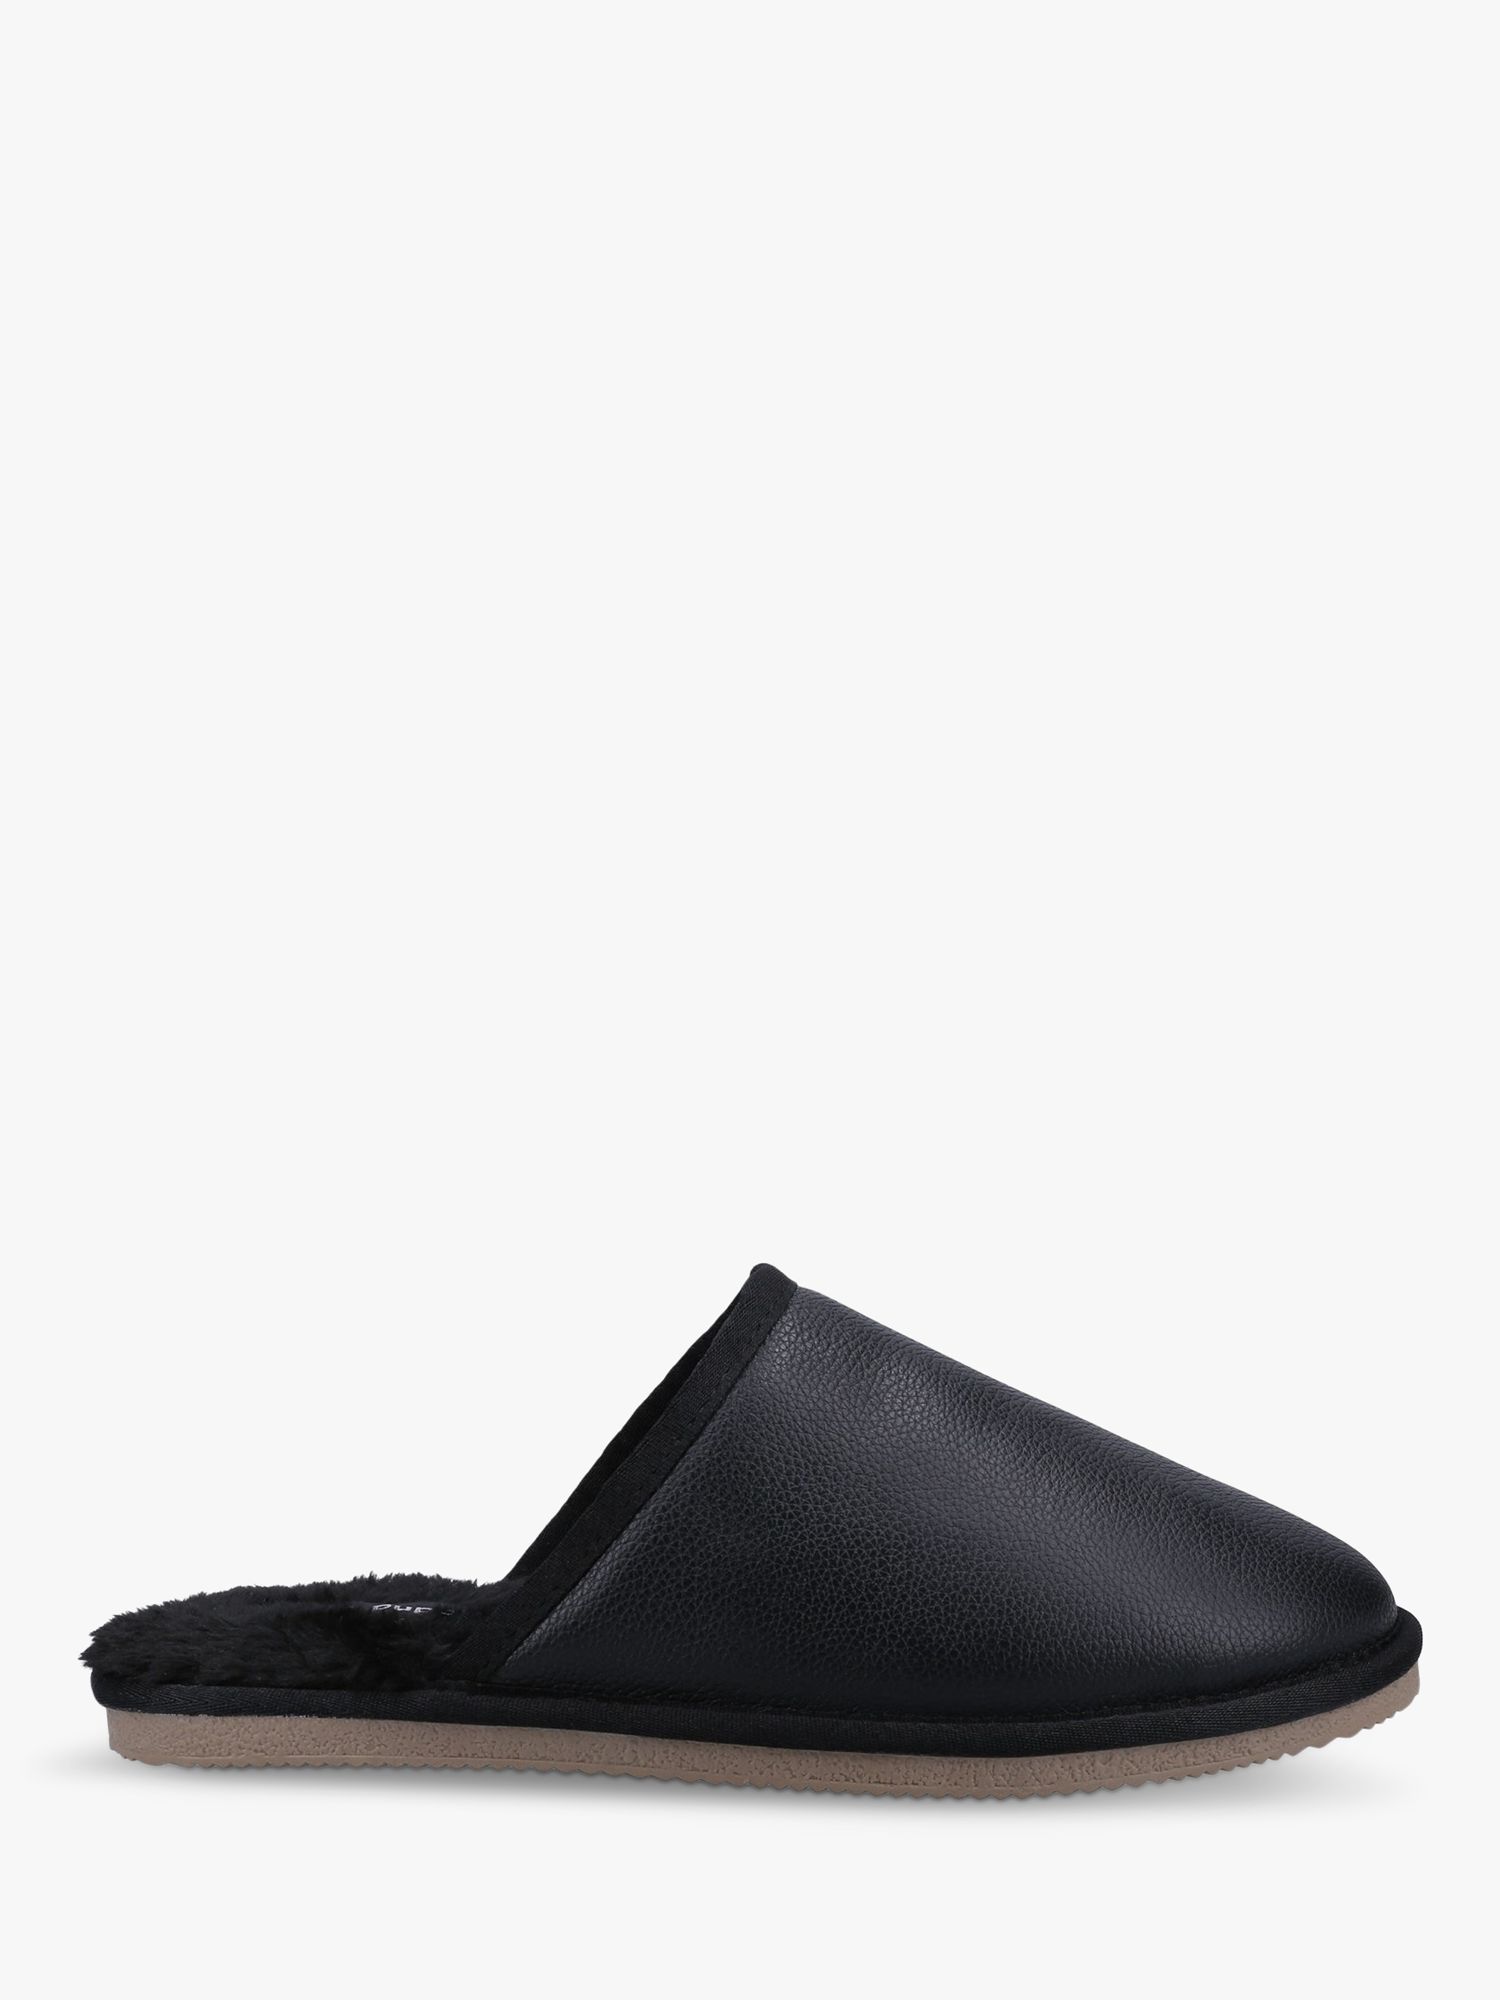 detail Koncentration filosofisk Hush Puppies Coady Leather Slippers at John Lewis & Partners